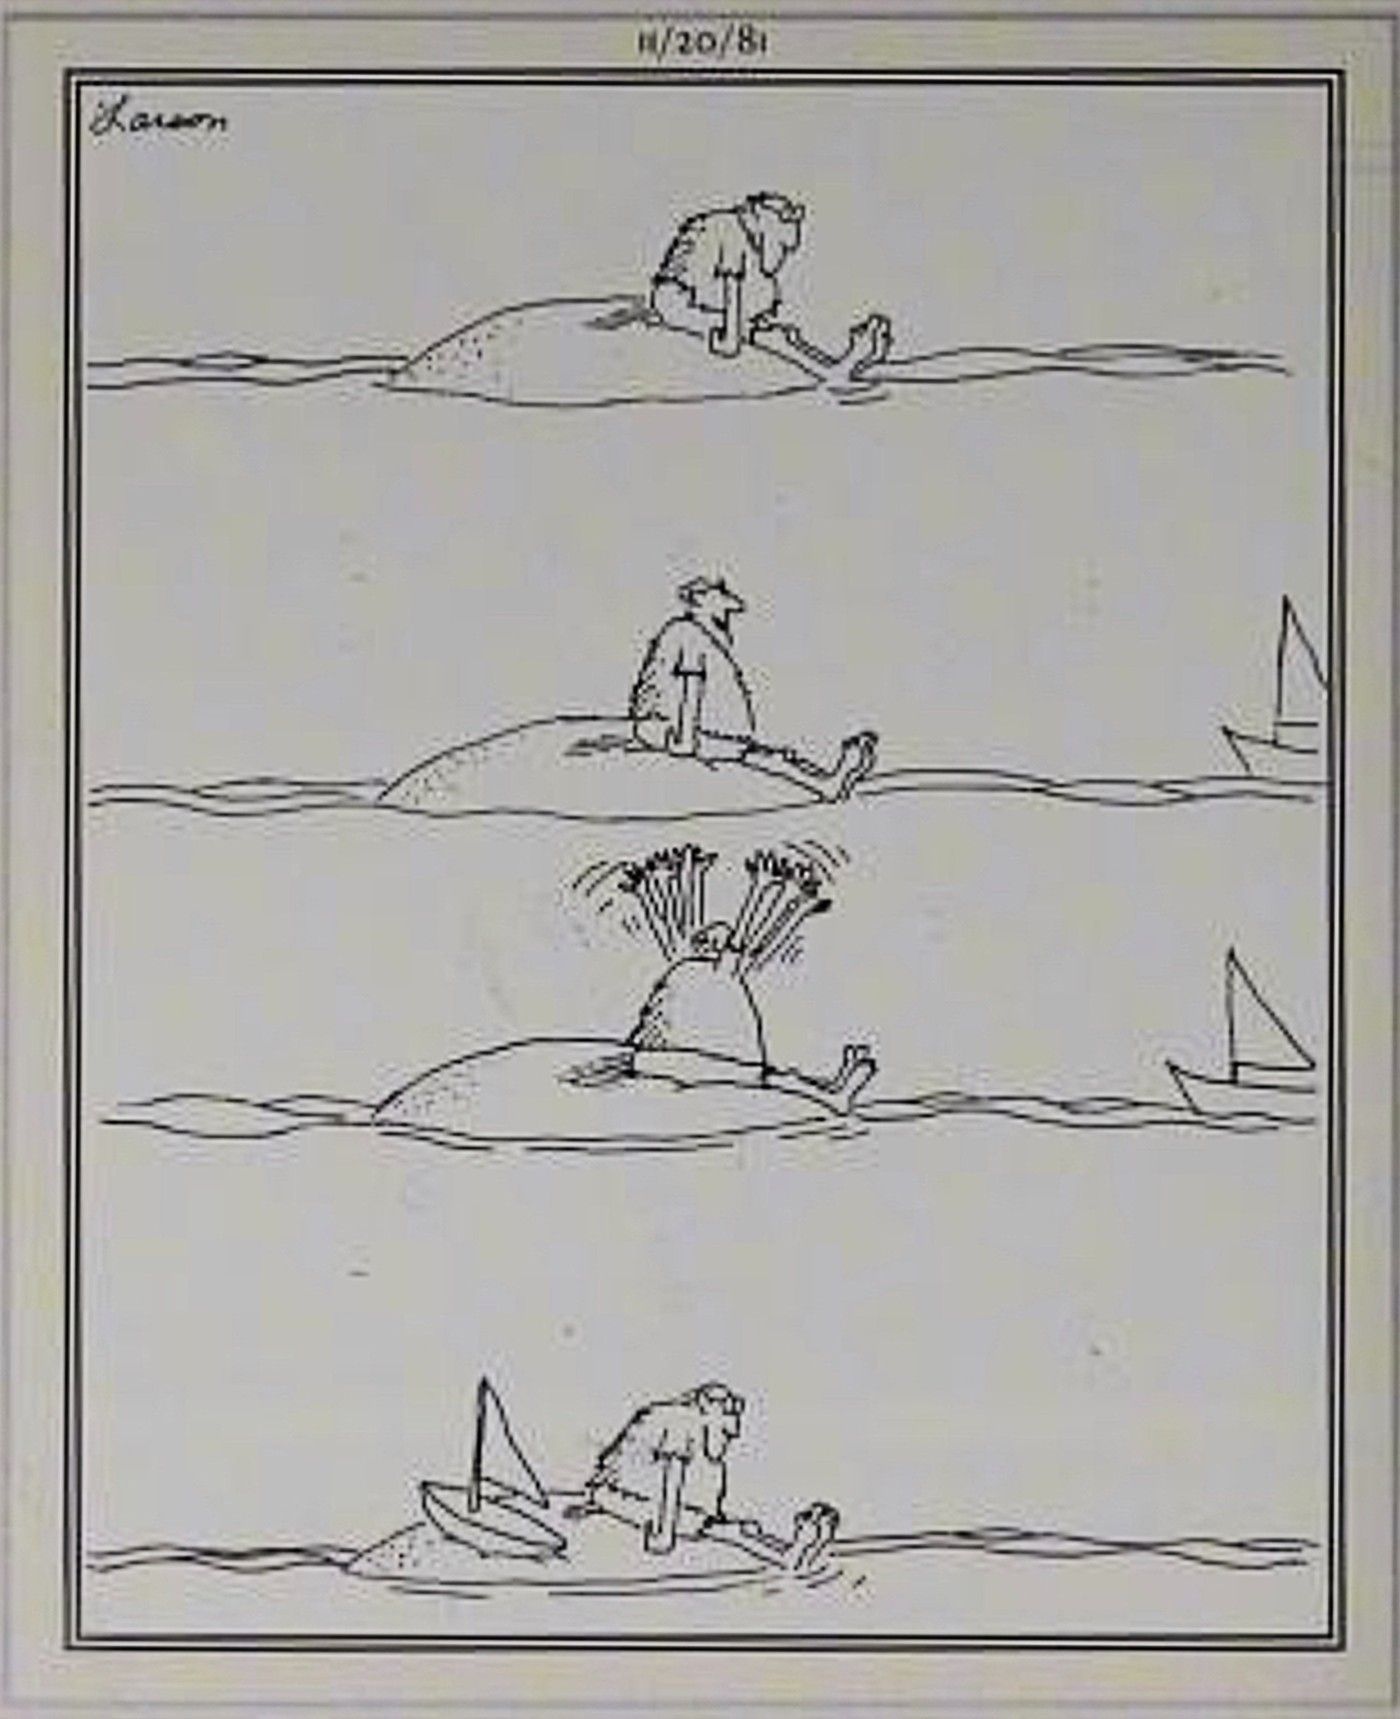 Far Side, man on desert island thinks he's rescued, turns out to be toy boat